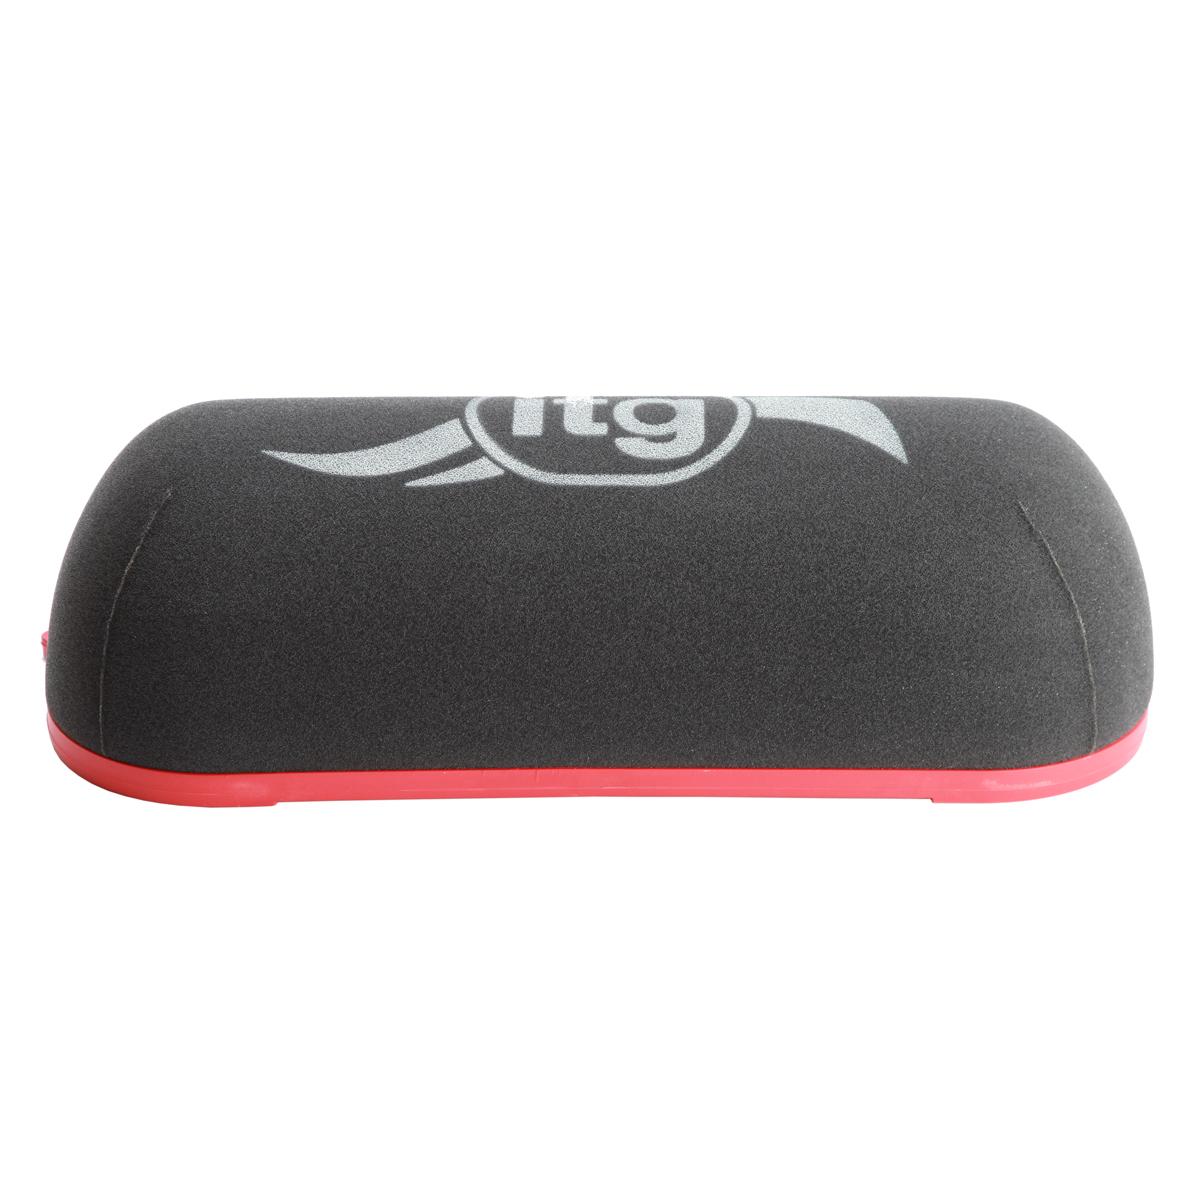 ITG Megaflow Air Filter JC50 Sausage Type with Domed Top